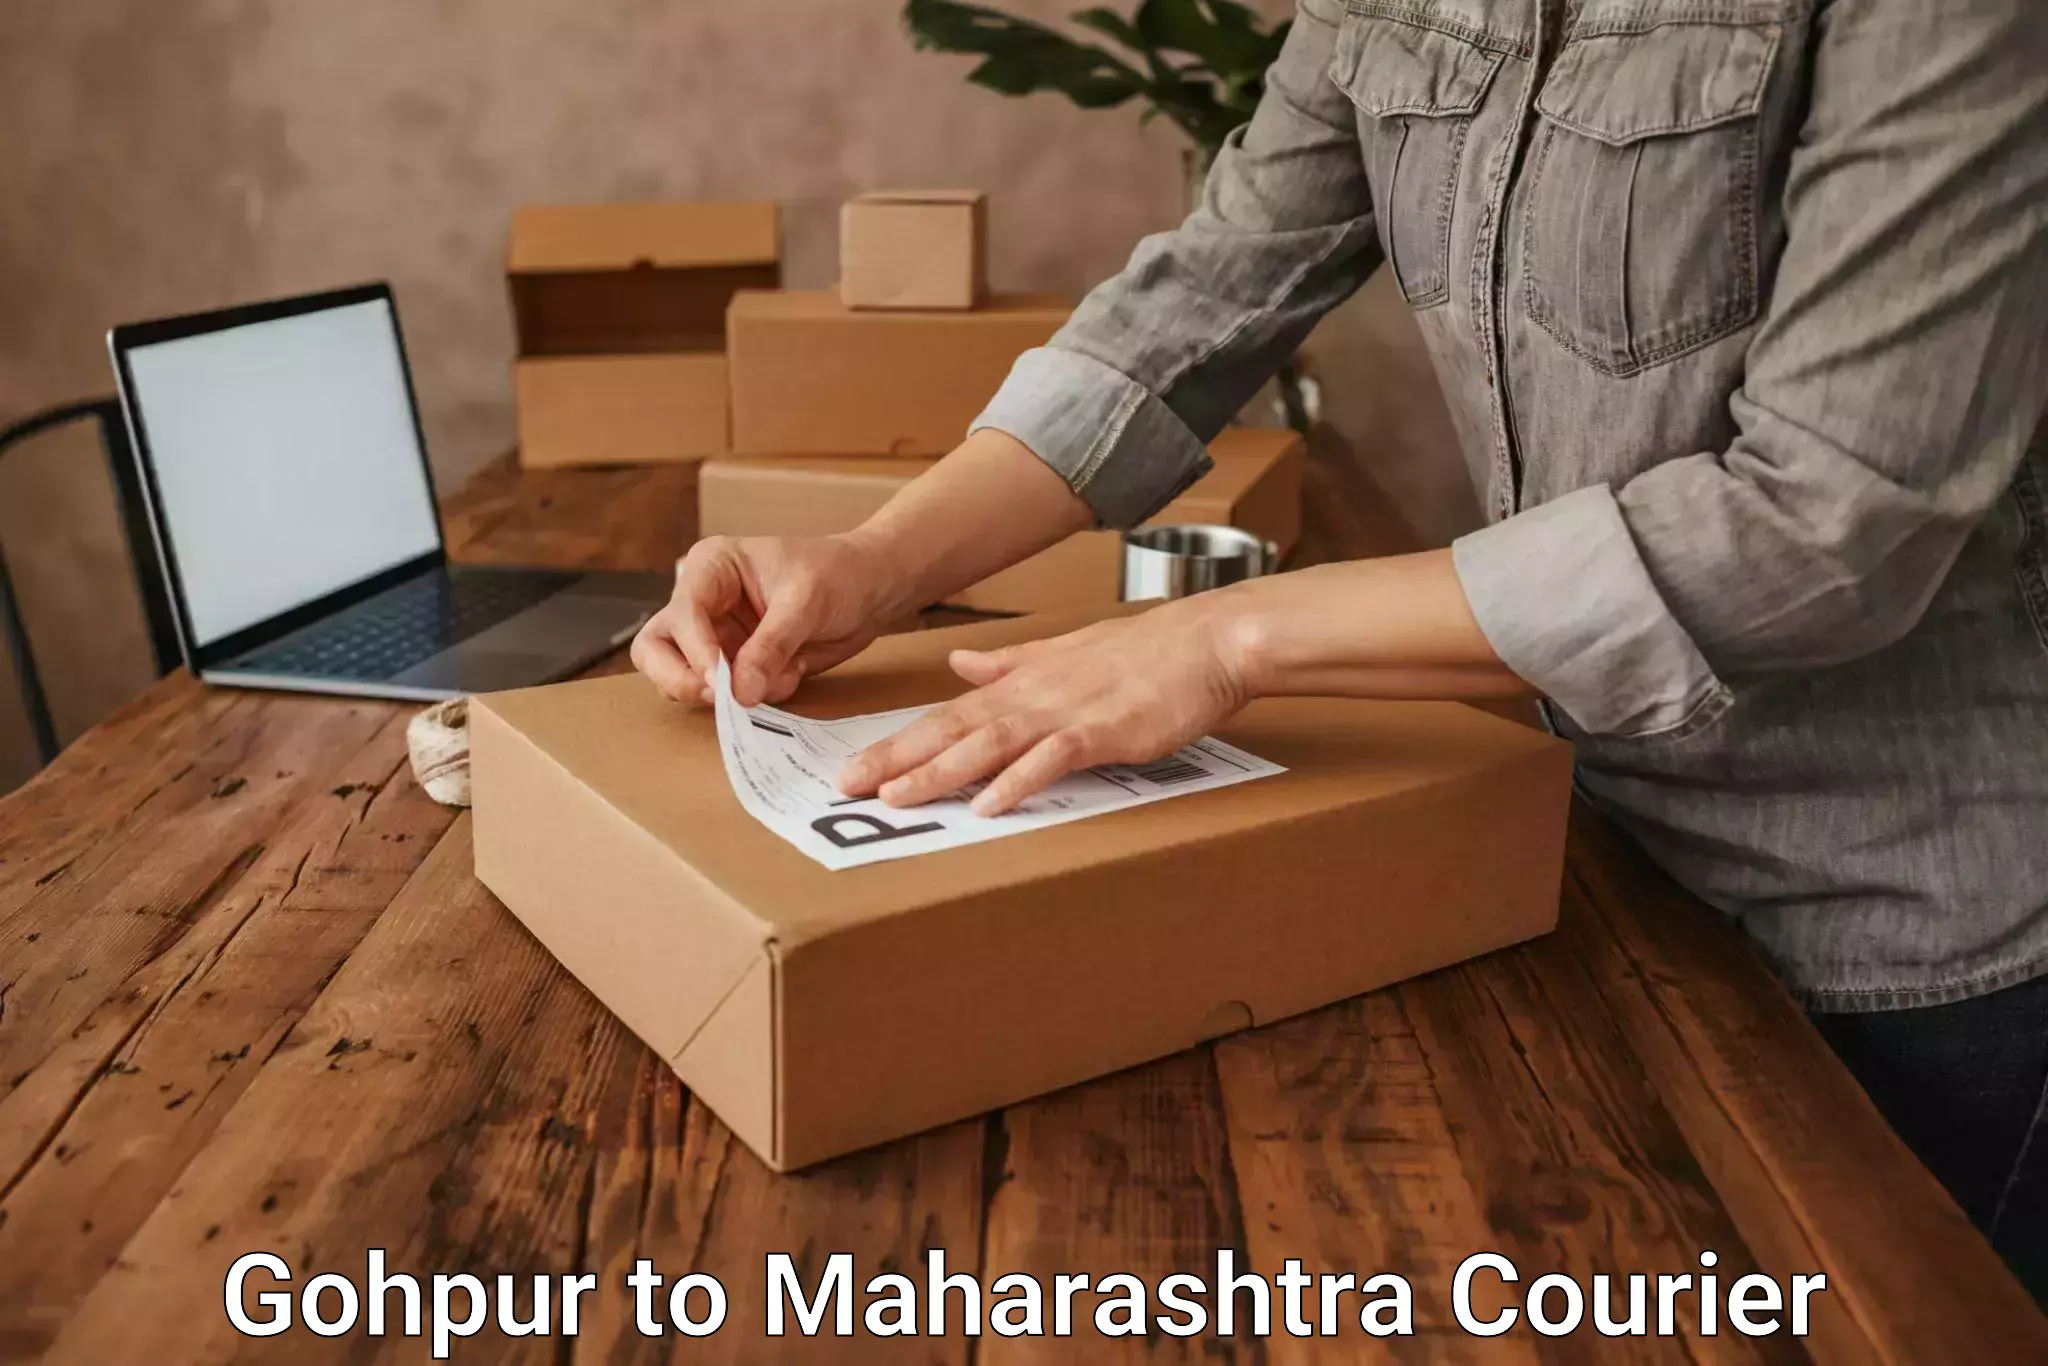 Courier dispatch services in Gohpur to IIIT Pune